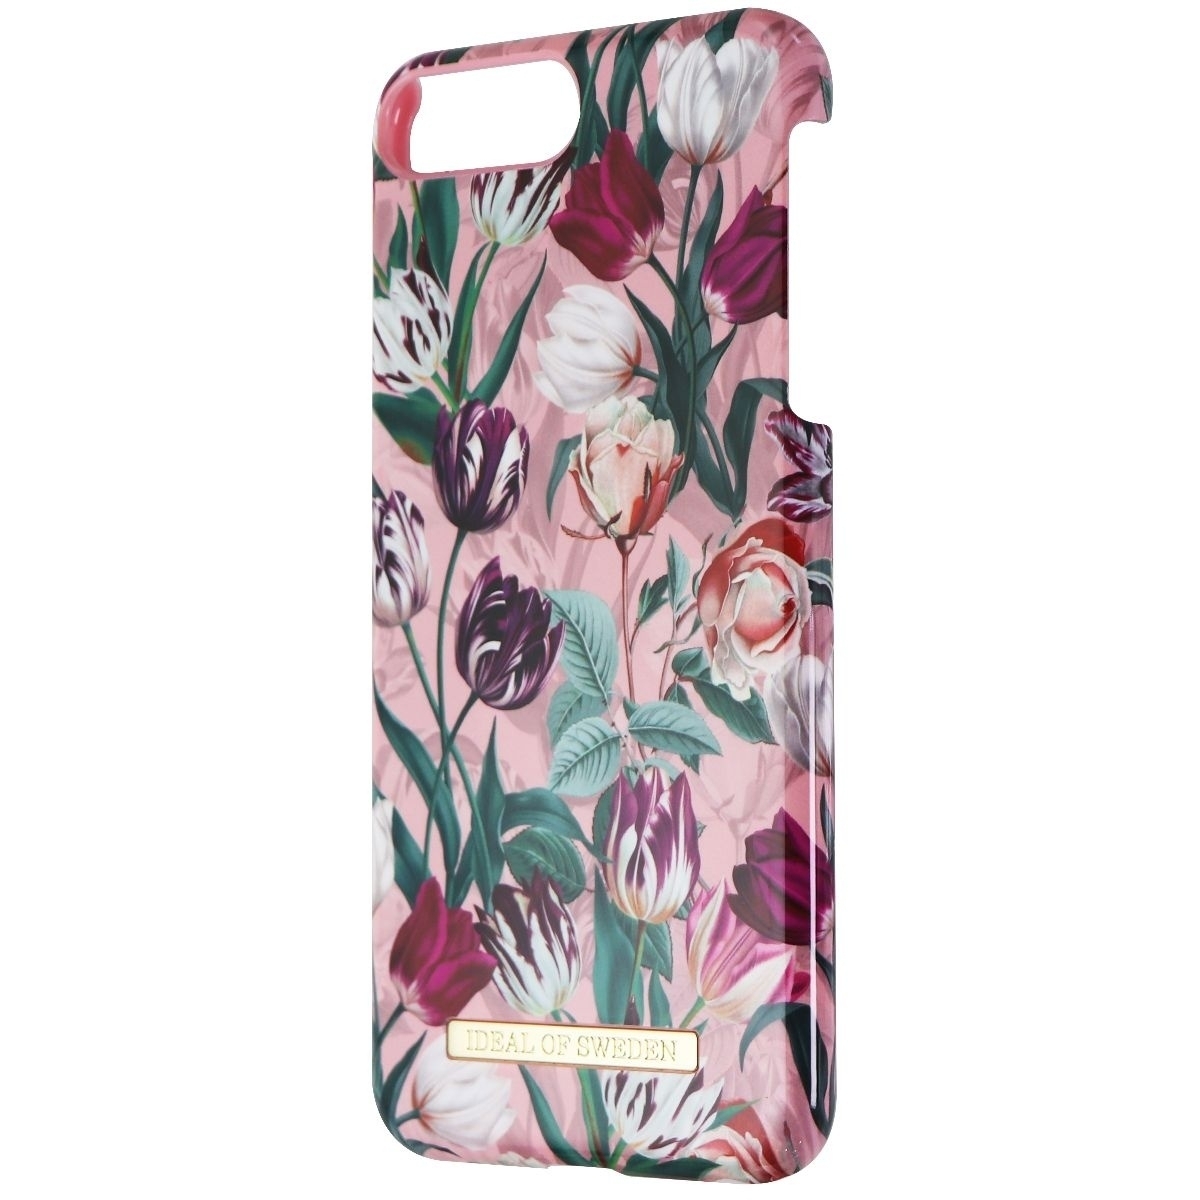 IDeal Of Sweden Hard Case For Apple IPhone 8 Plus/7 Plus/6s Plus - Pink/Flowers